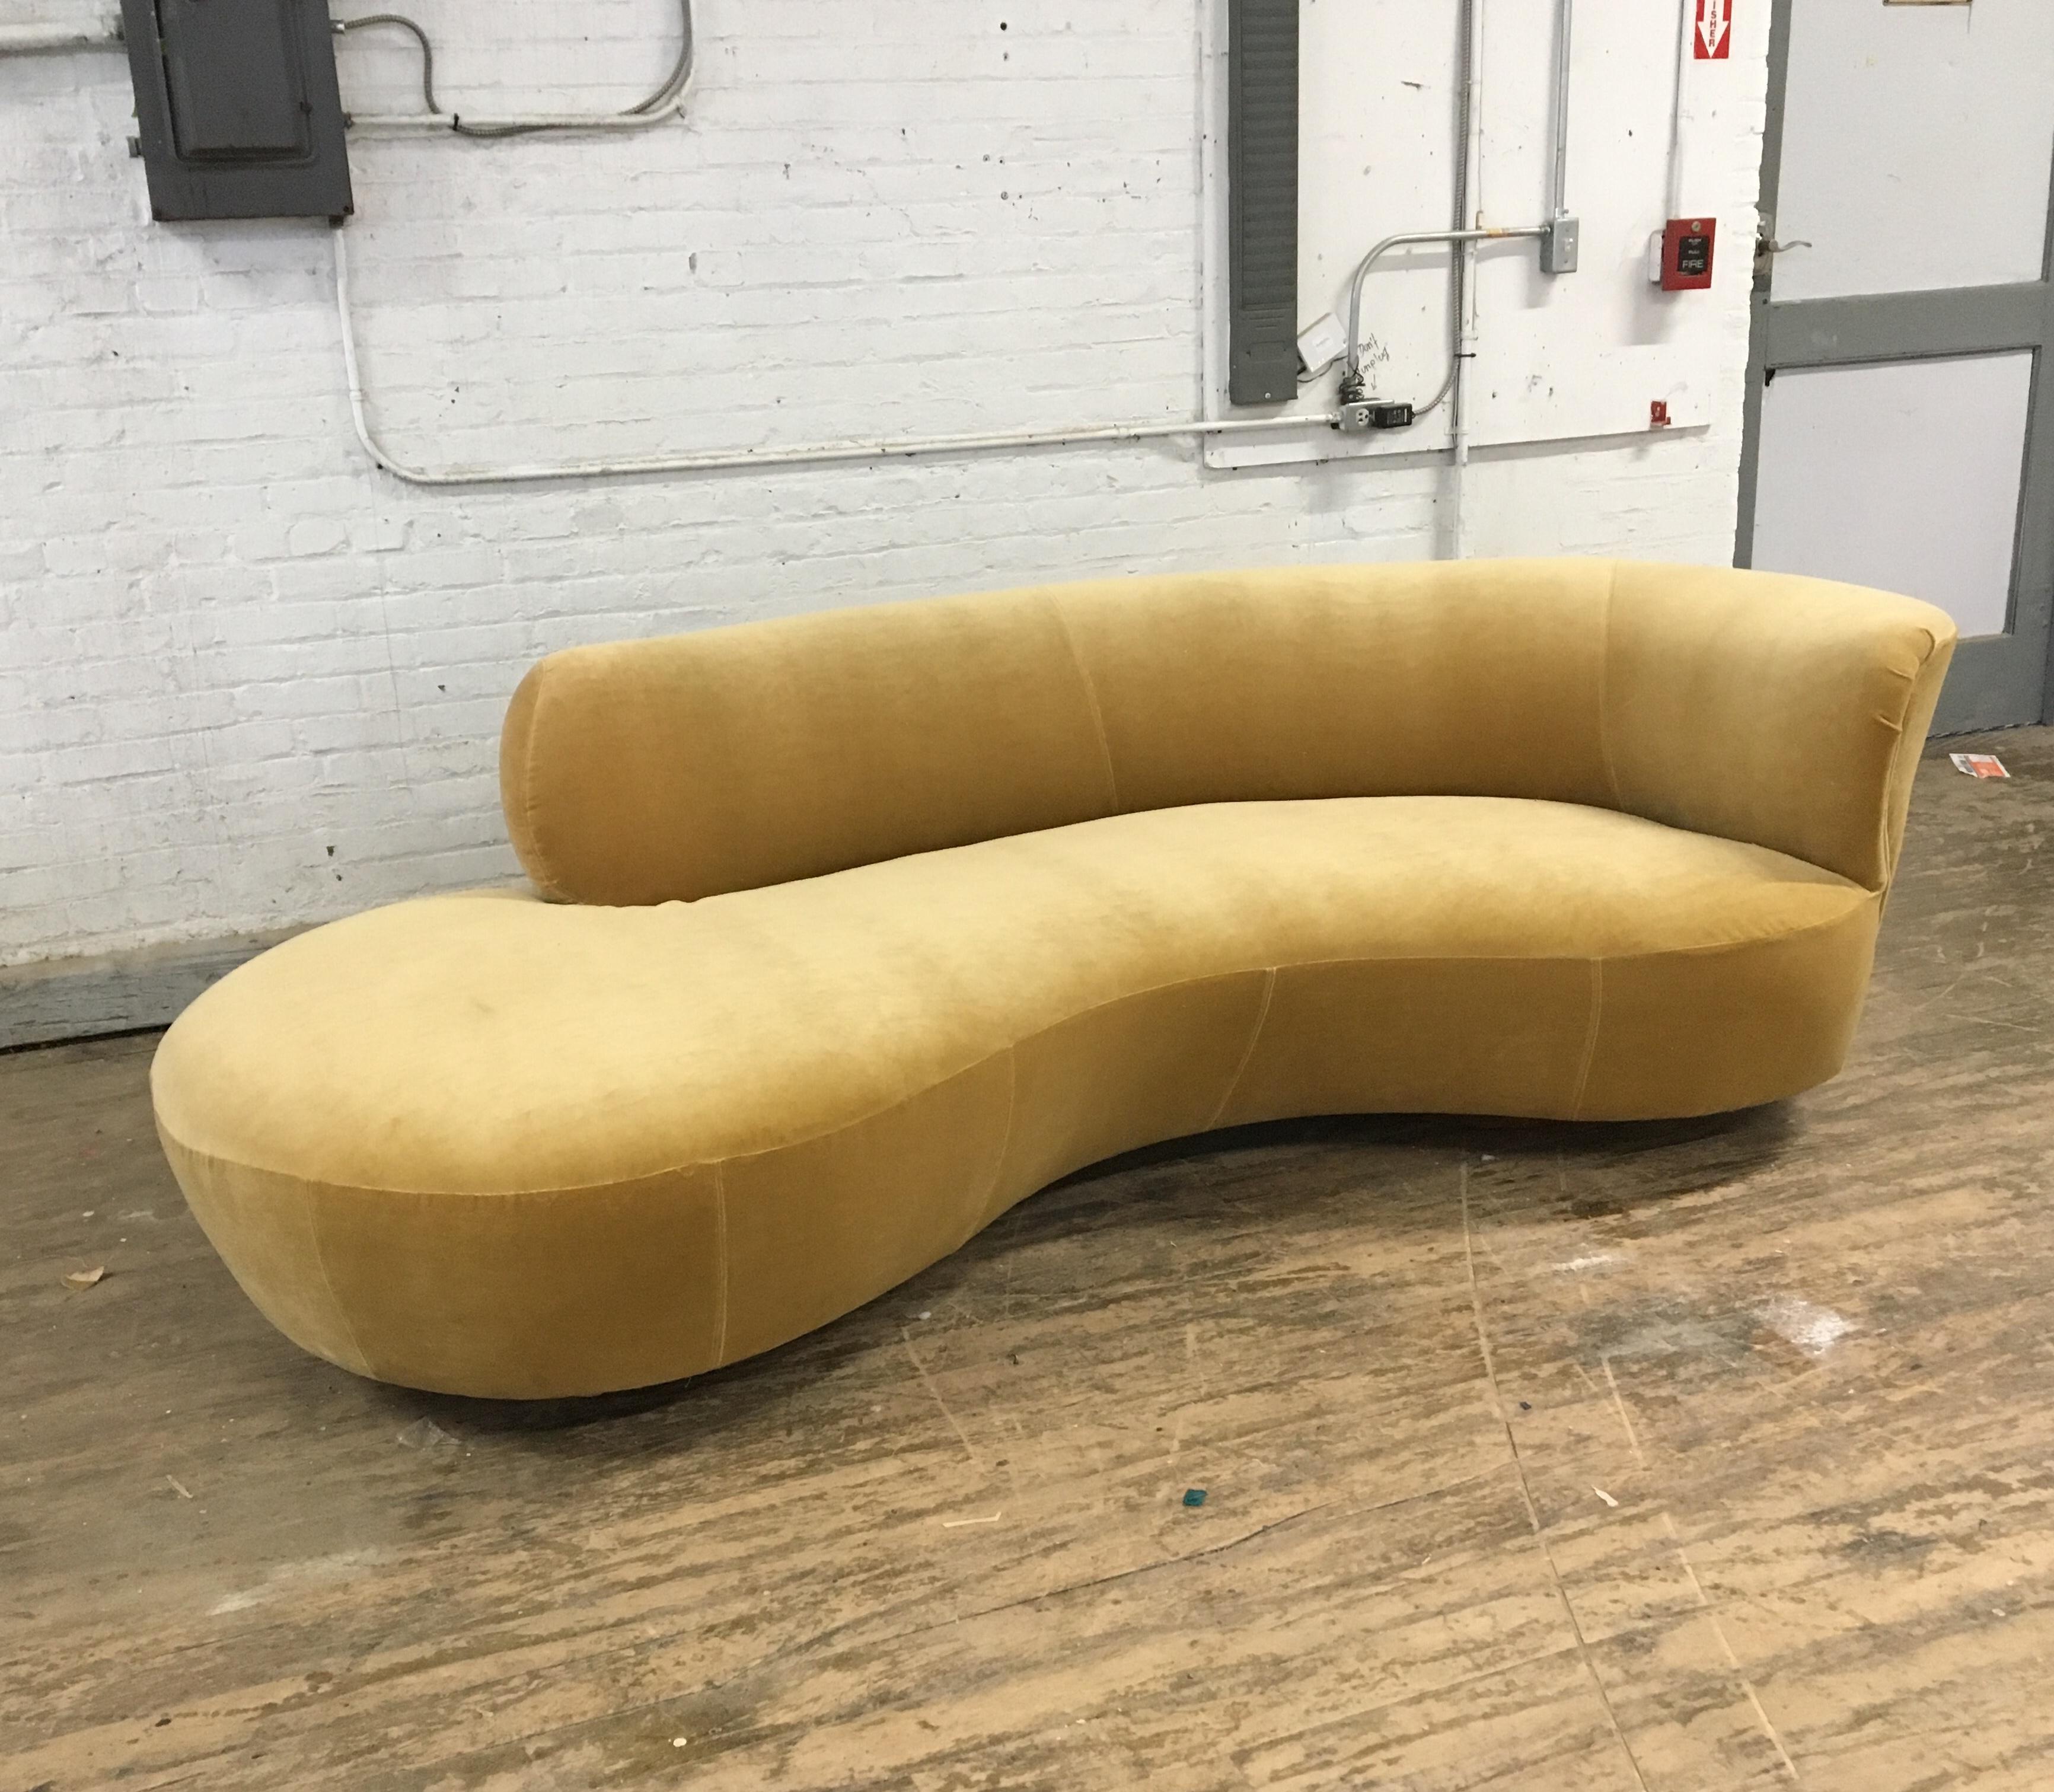 Cloud sofa in camel cotton velvet with rosewood round bases designed by Vladimir Kagan for Weiman. (Label present)
Reupholstered in camel cotton velvet.
Measures: 96